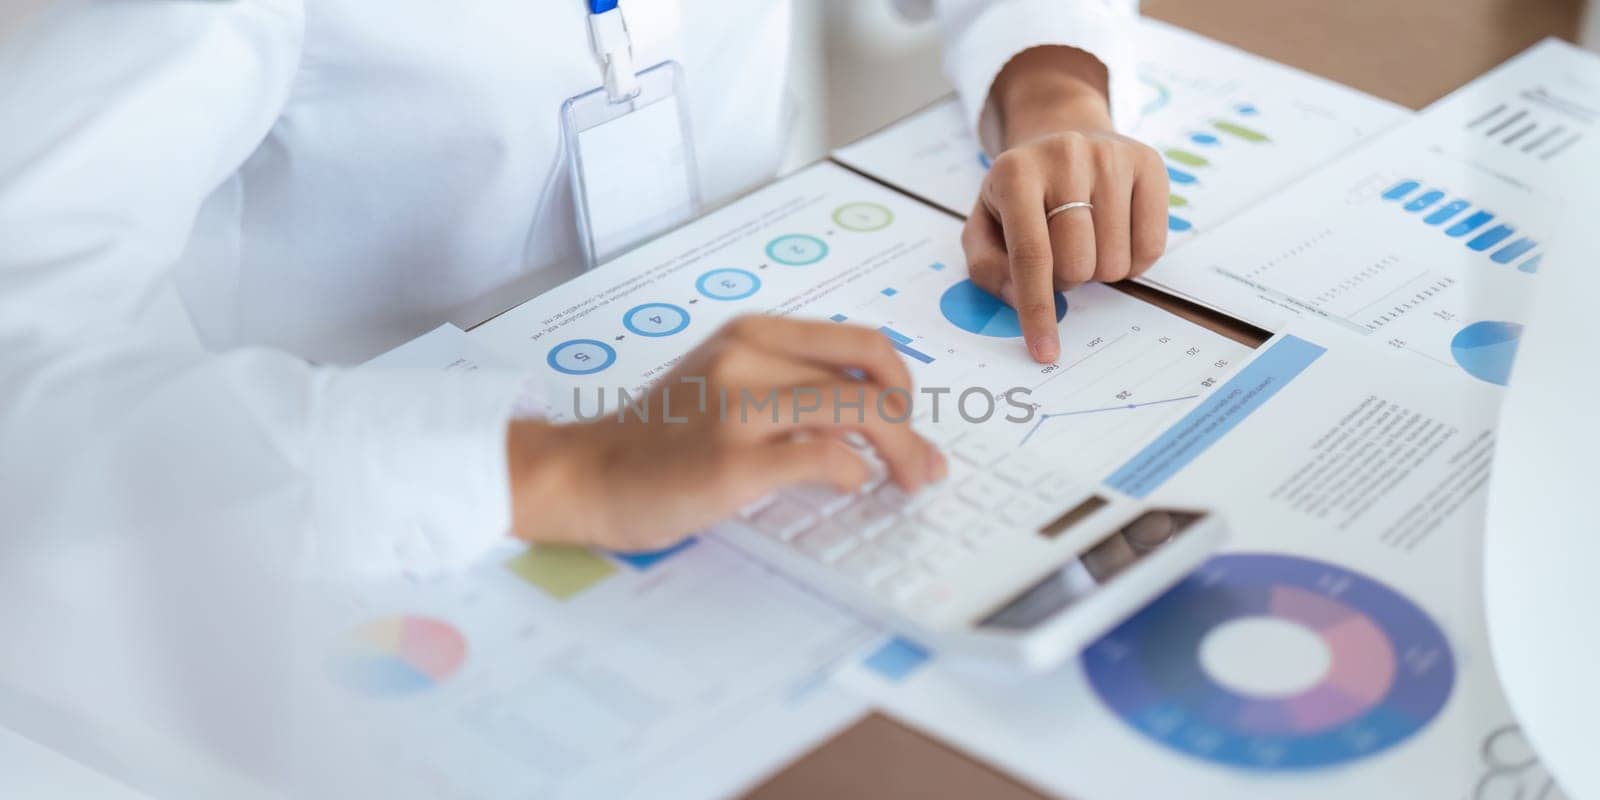 Close up business team analyzes financial business finance reports on laptop and graph documents during corporate meeting discussion showing successful teamwork, business meeting ideas by nateemee